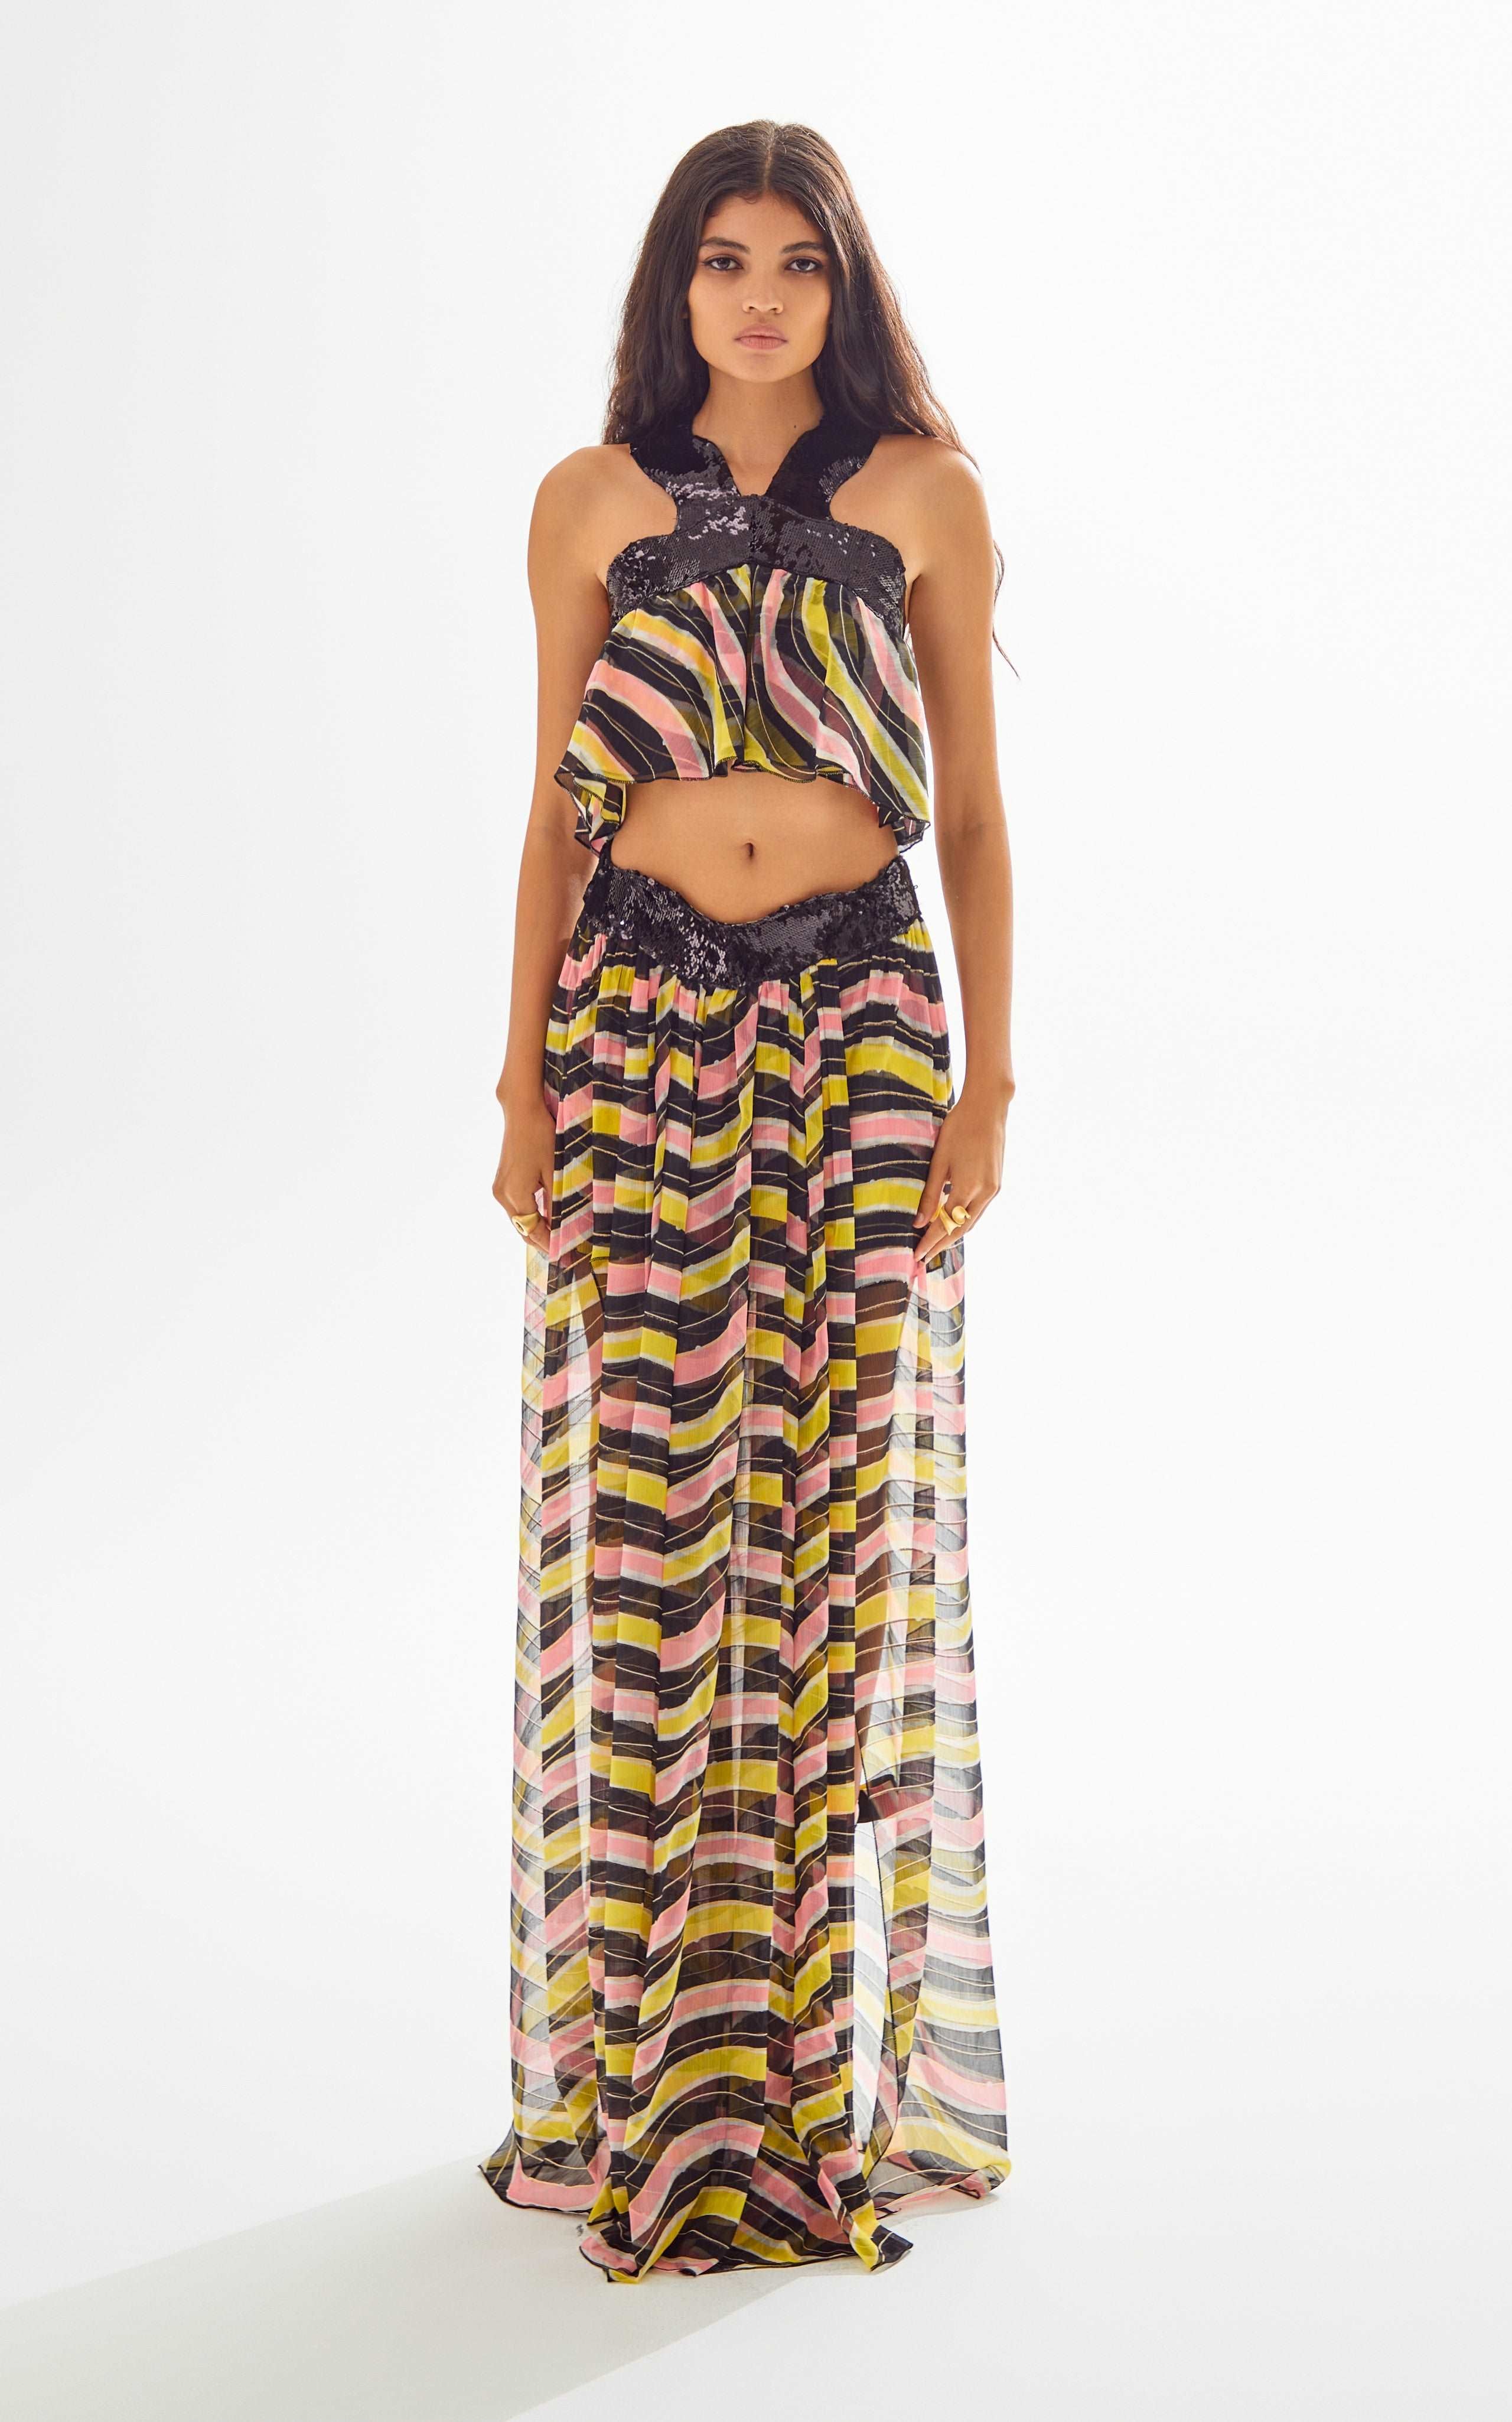 Amazonica Chiffon Wavy Striped Cross Neck Top with Black Sequin Details